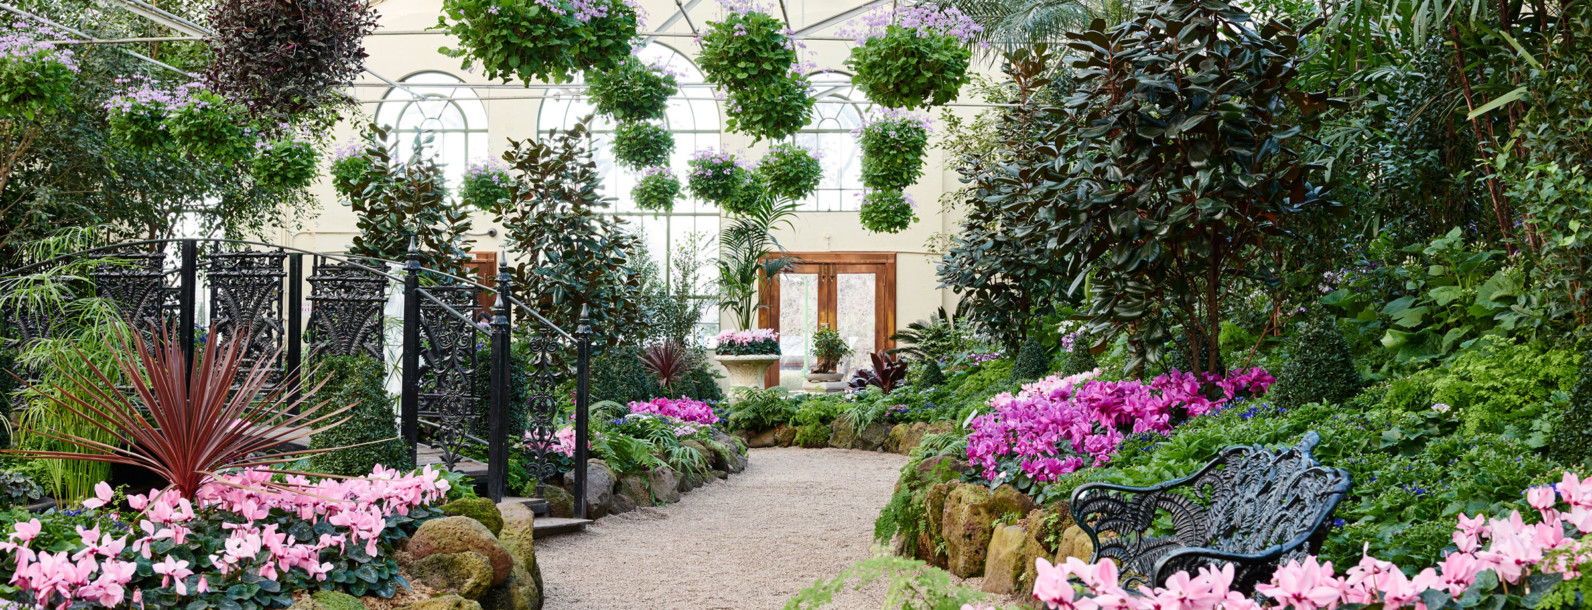 Fitzroy Gardens Conservatory - Where Could Be Your Perfect Wedding Ceremony Locations In Melbourne